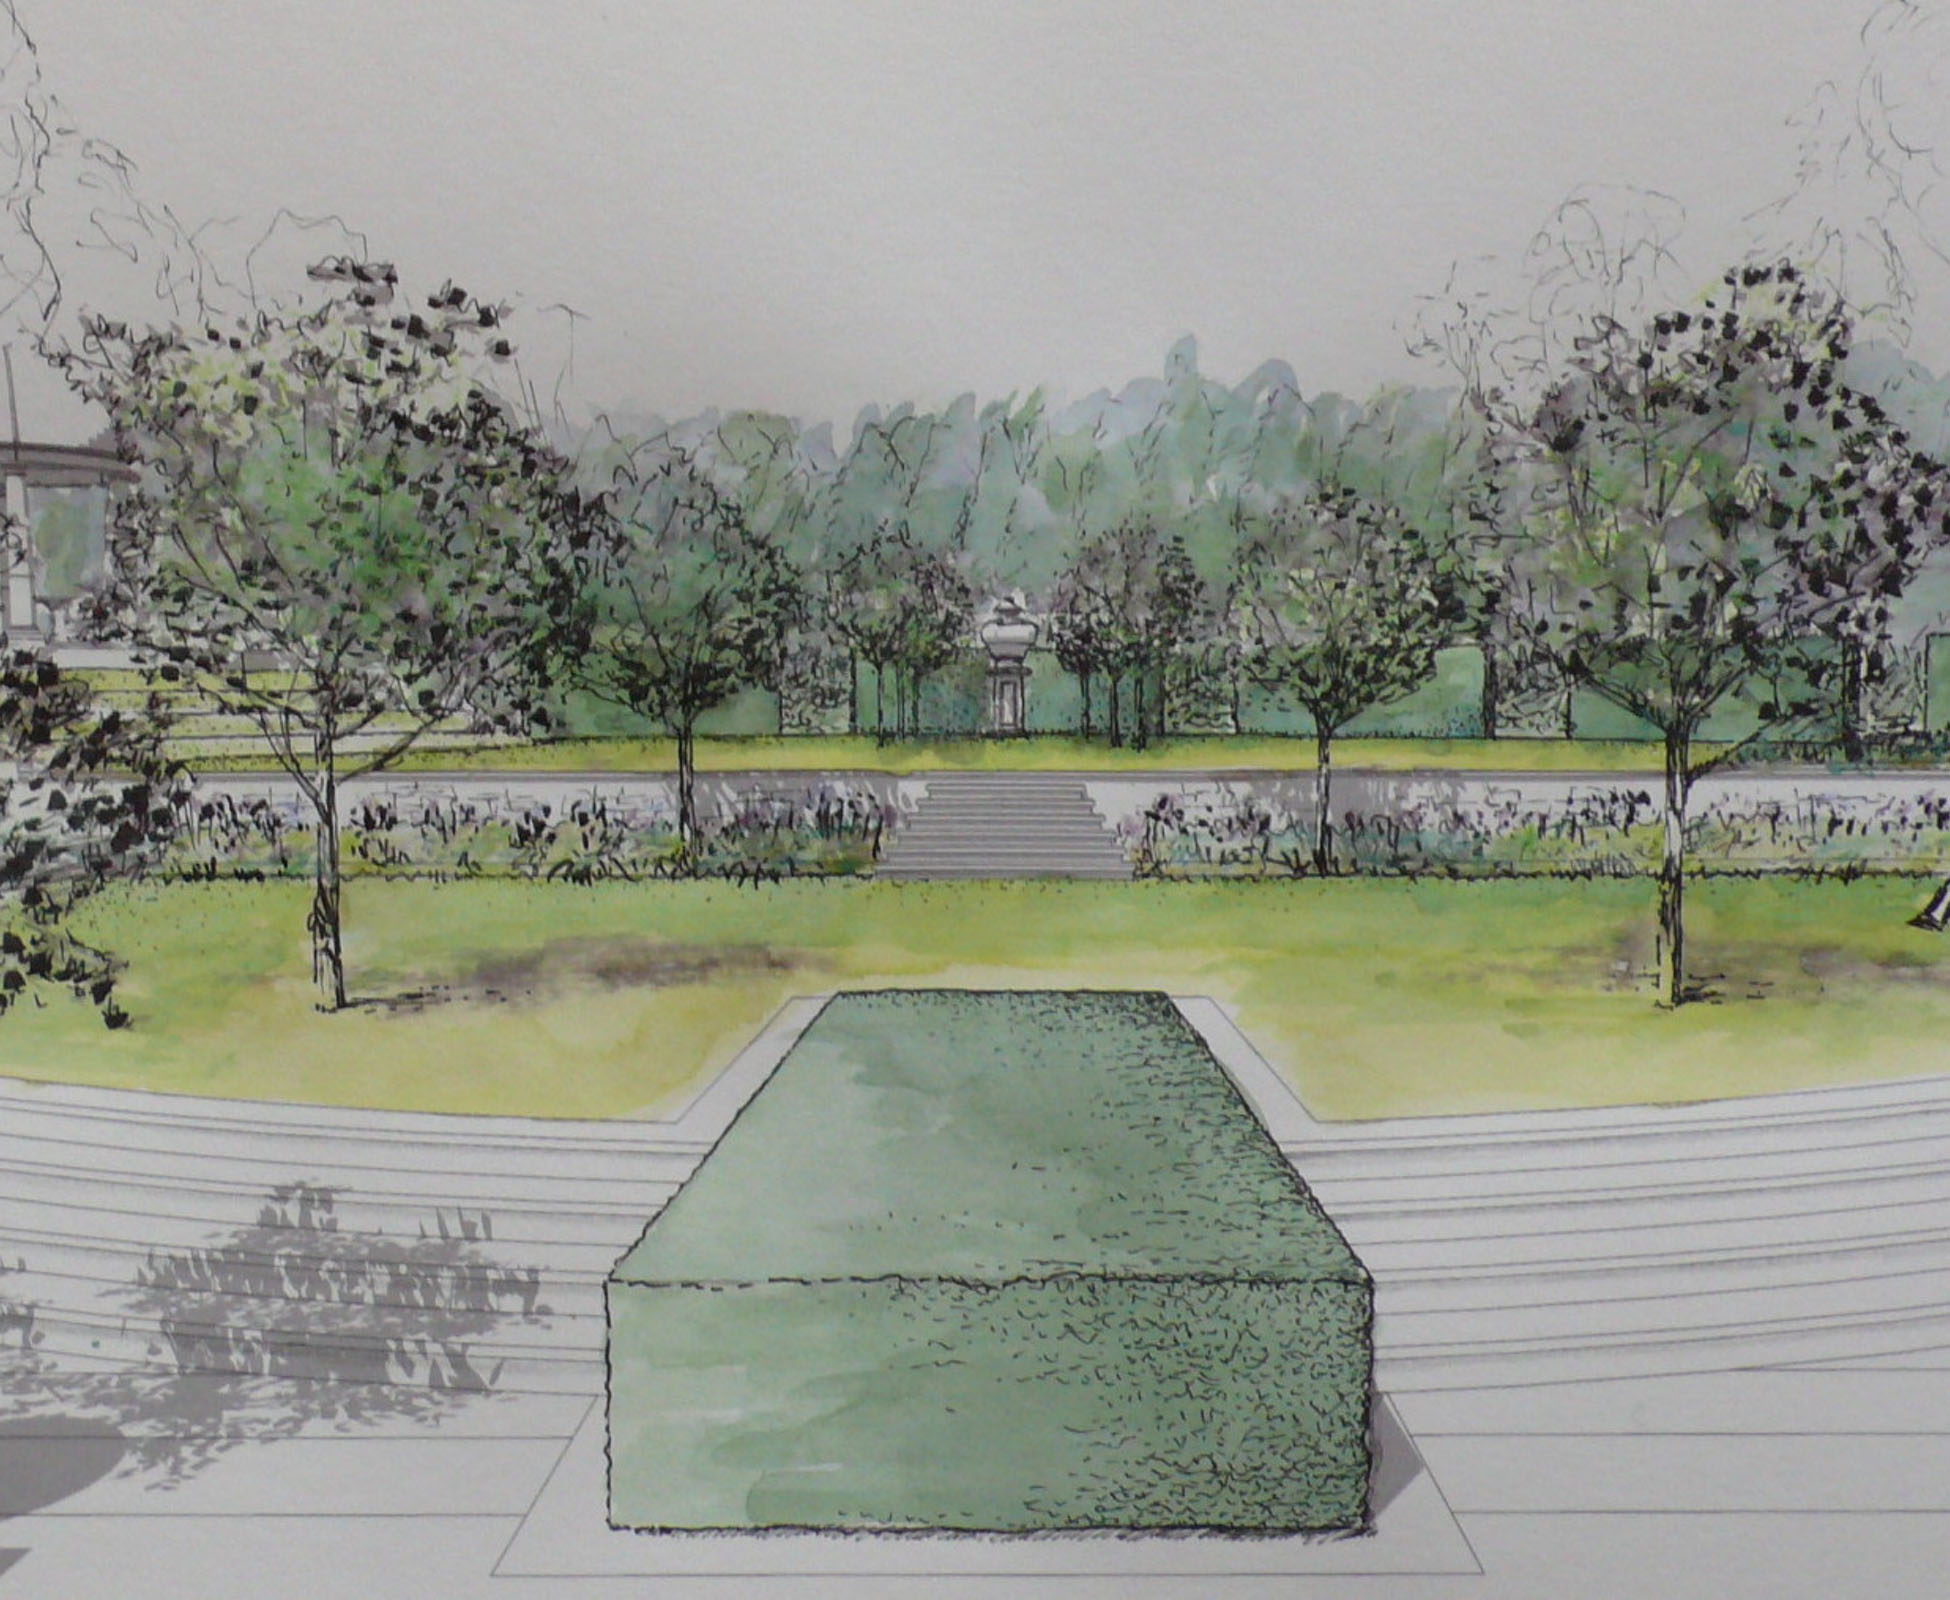 One of London Garden Designer original design sketches, hand drawing, to explain the concept to the client of this country garden.